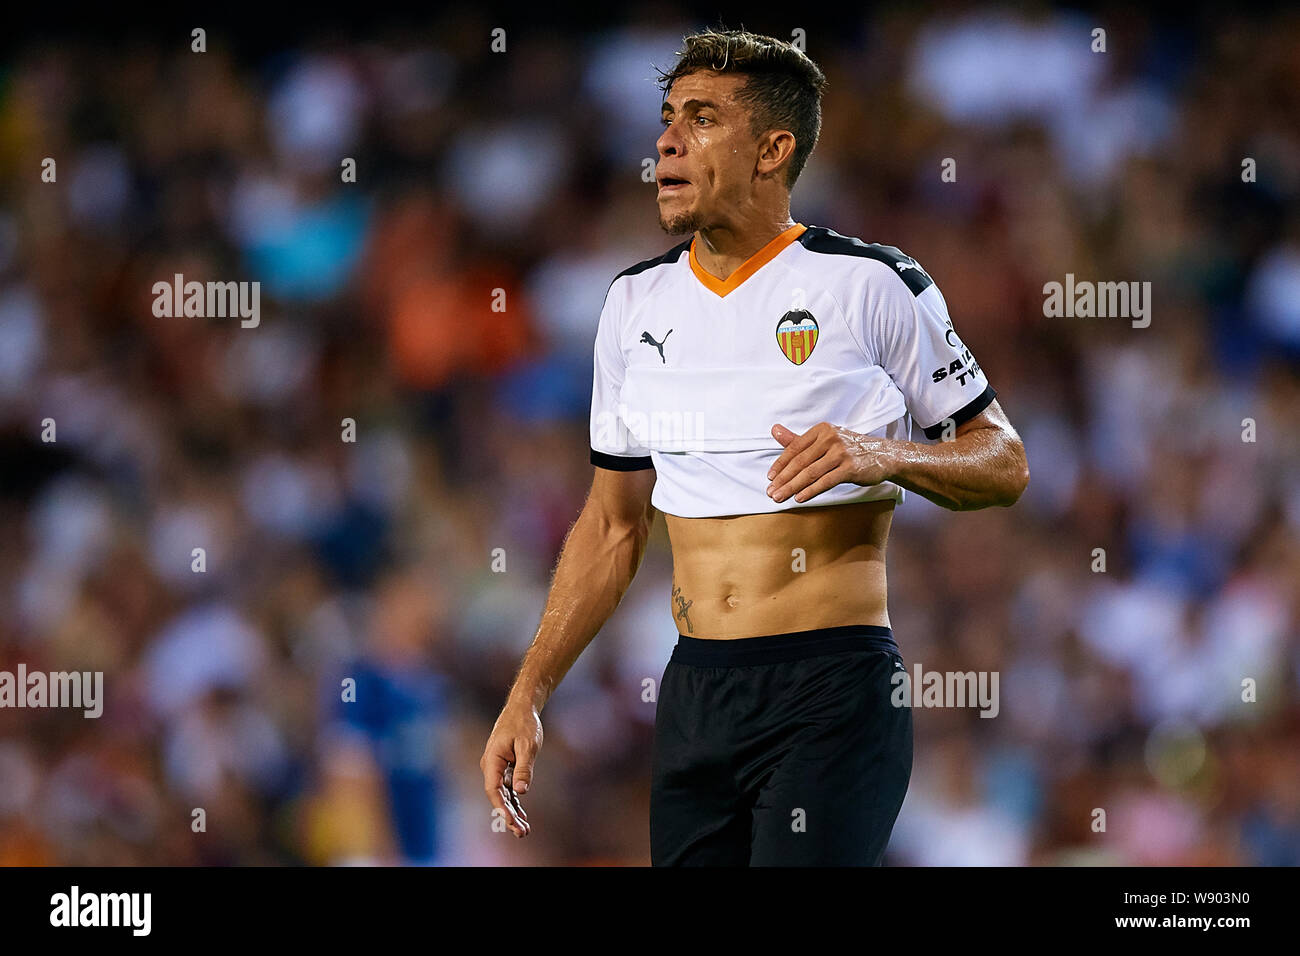 VALENCIA, SPAIN - AUGUST 10: Gabriel Paulista of Valencia CF looks on during the Bwin Trofeo Naranja friendly match between Valencia CF and FC Internazionale at Estadio Mestalla on August 10, 2019 in Valencia, Spain. (Photo by Get Ready Images/MB Media) Stock Photo